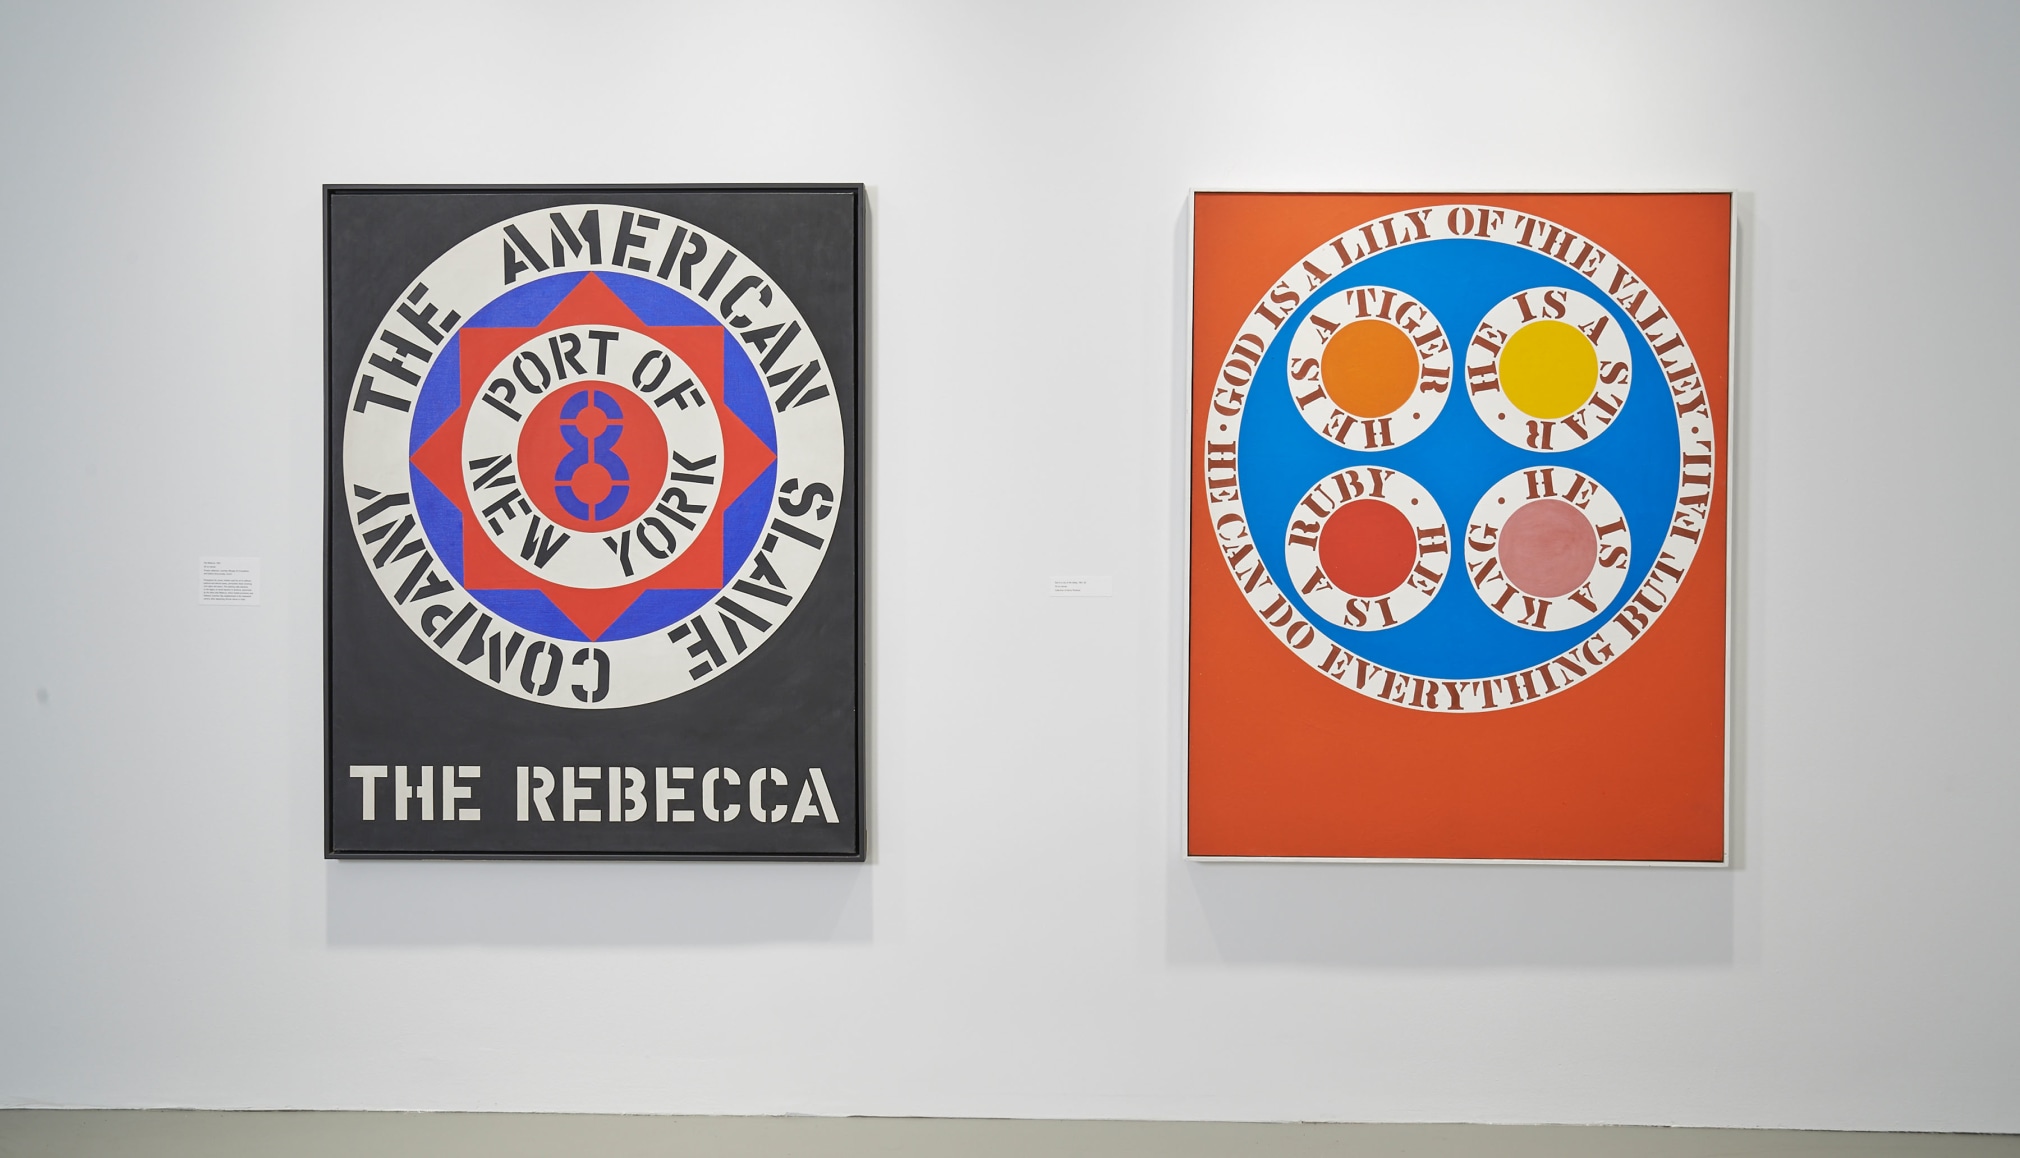 Installation view of Robert Indiana: Beyond LOVE, Whitney Museum of American Art, New York, September 26, 2013&ndash;January 5, 2014. Left to right, The Rebecca (1962) and God Is a Lily of the Valley (1961&ndash;62), &nbsp;